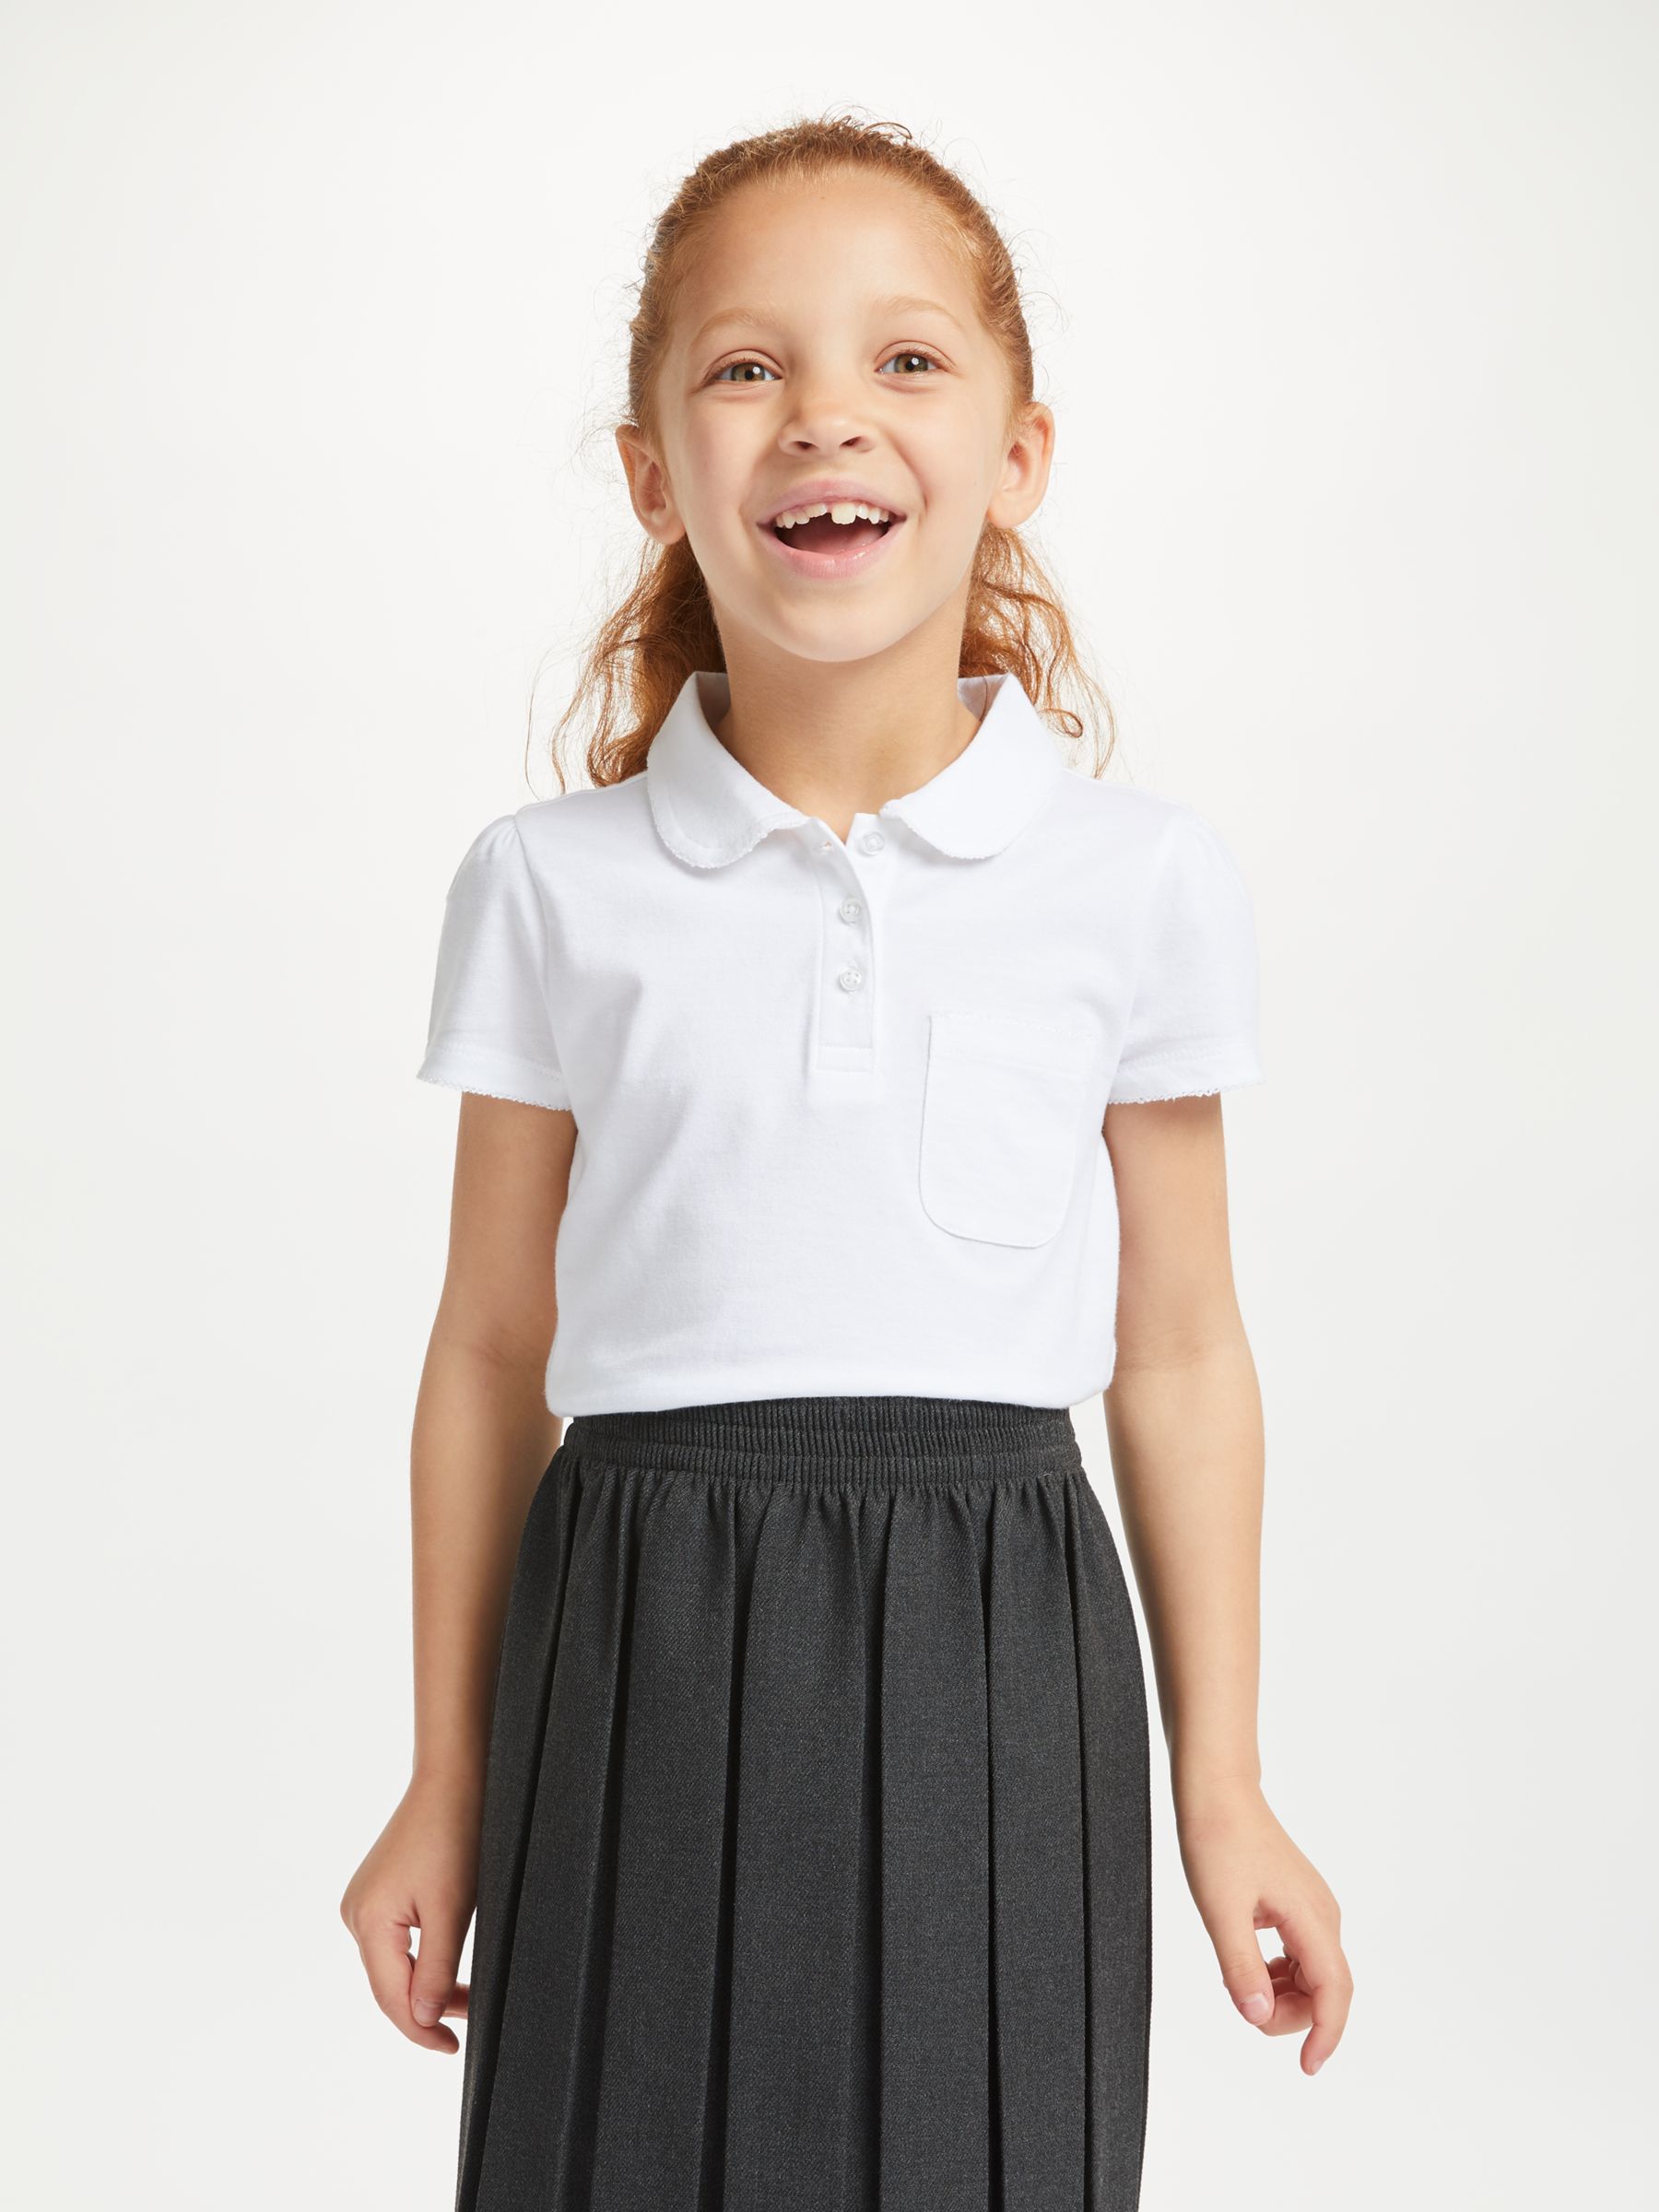 Buy John Lewis Pure Cotton Picot Trim School Polo Shirt, Pack of 2 Online at johnlewis.com